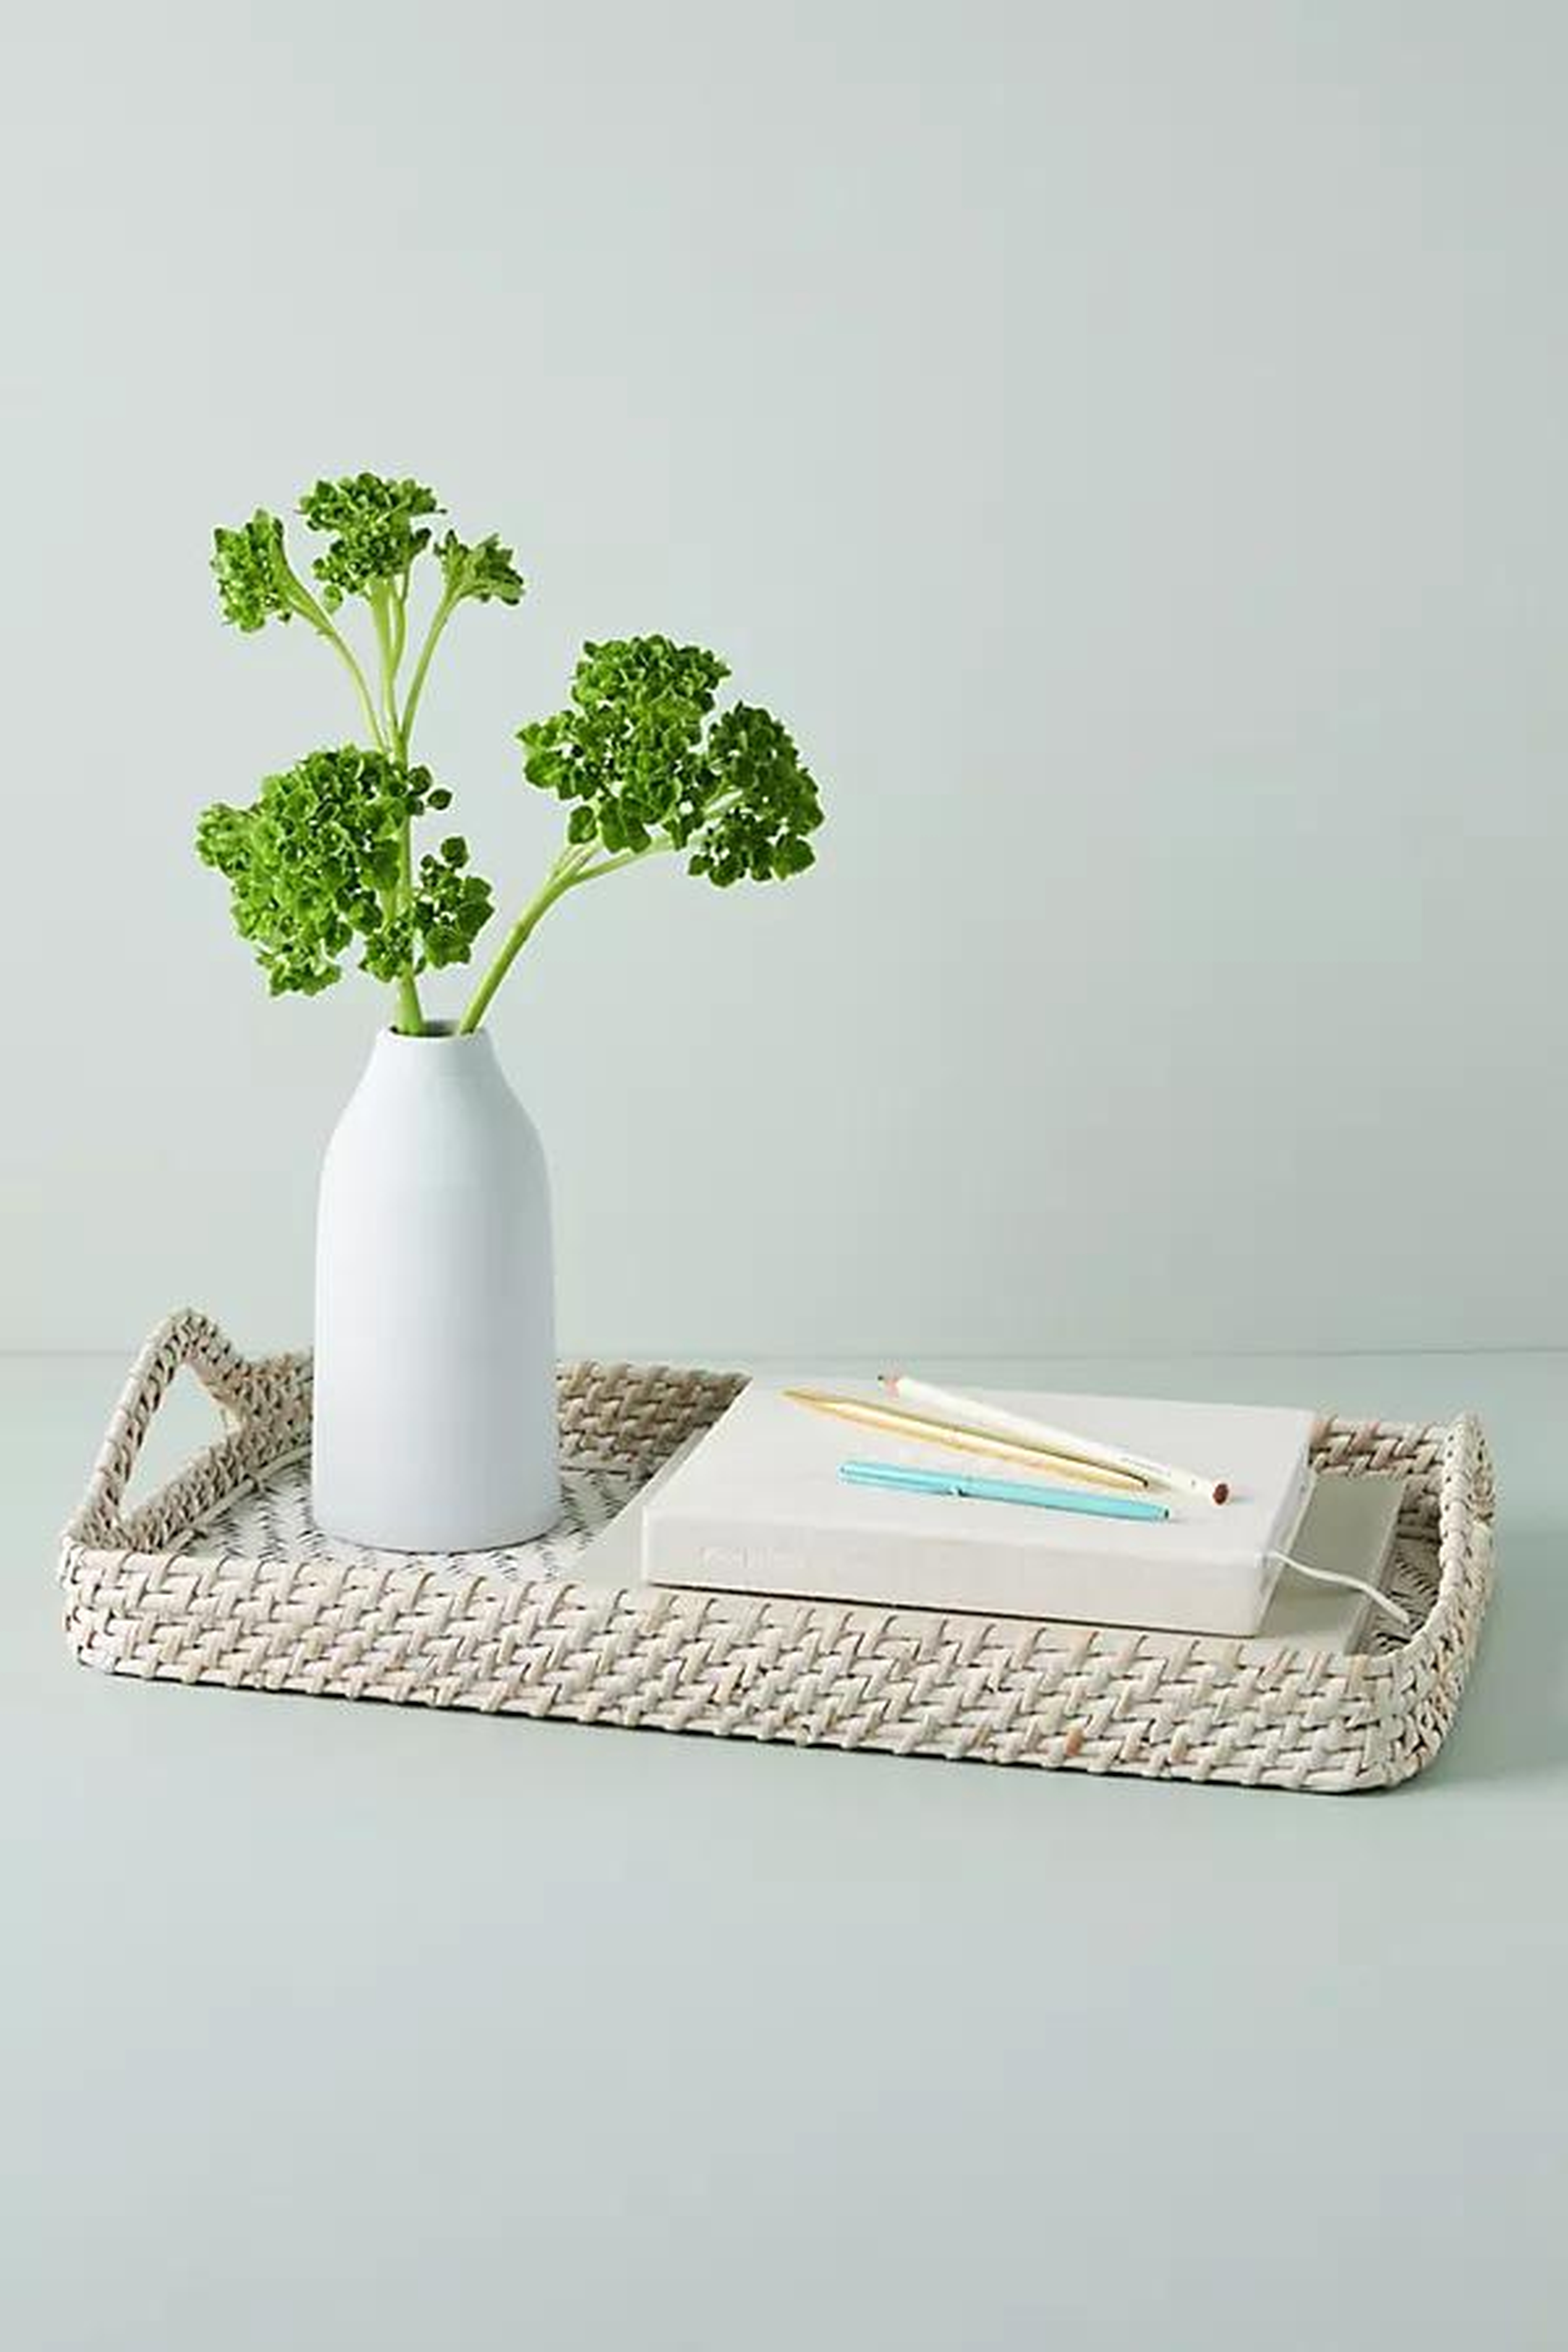 Handwoven Elonne Decorative Tray By Anthropologie in White - Anthropologie